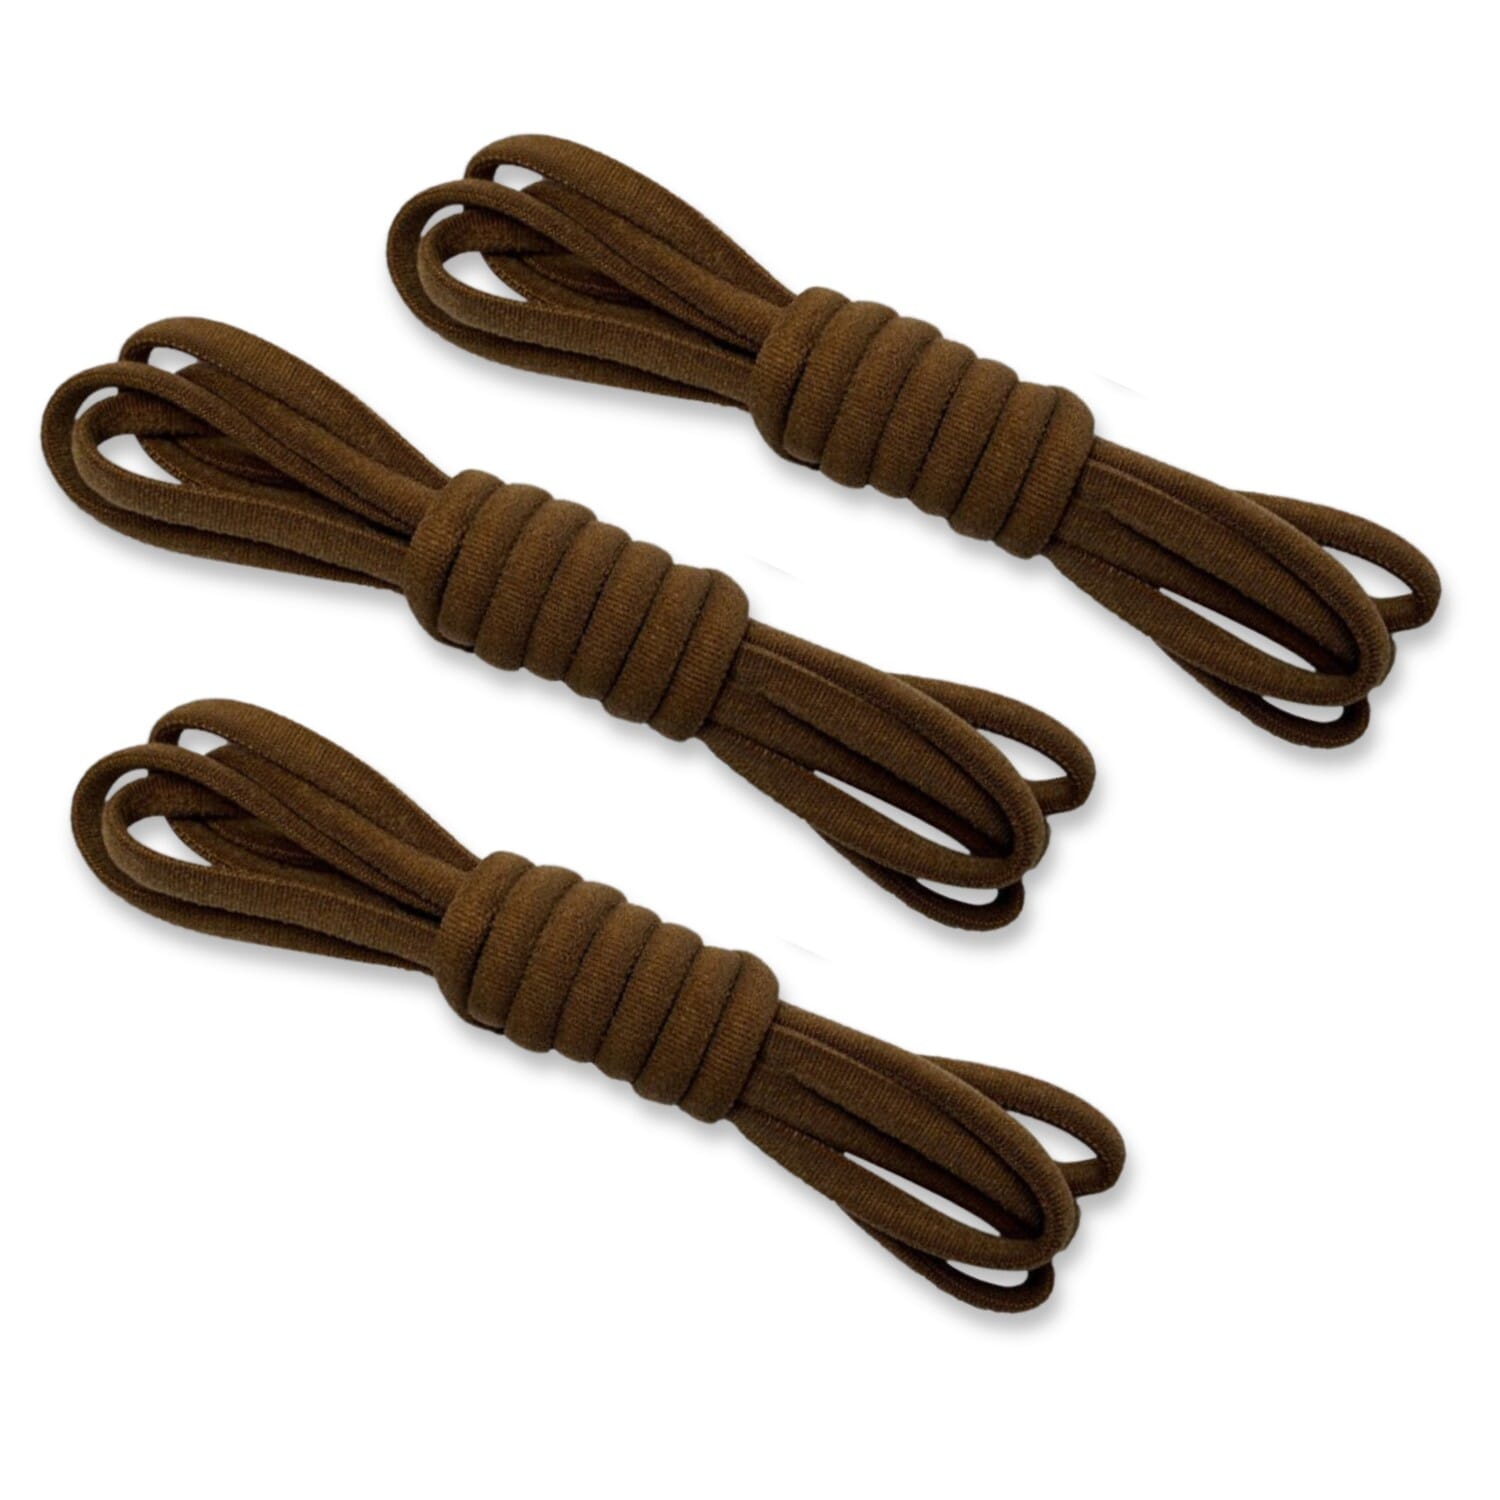 View Elastic Shoe Laces Brown 3 Pairs information